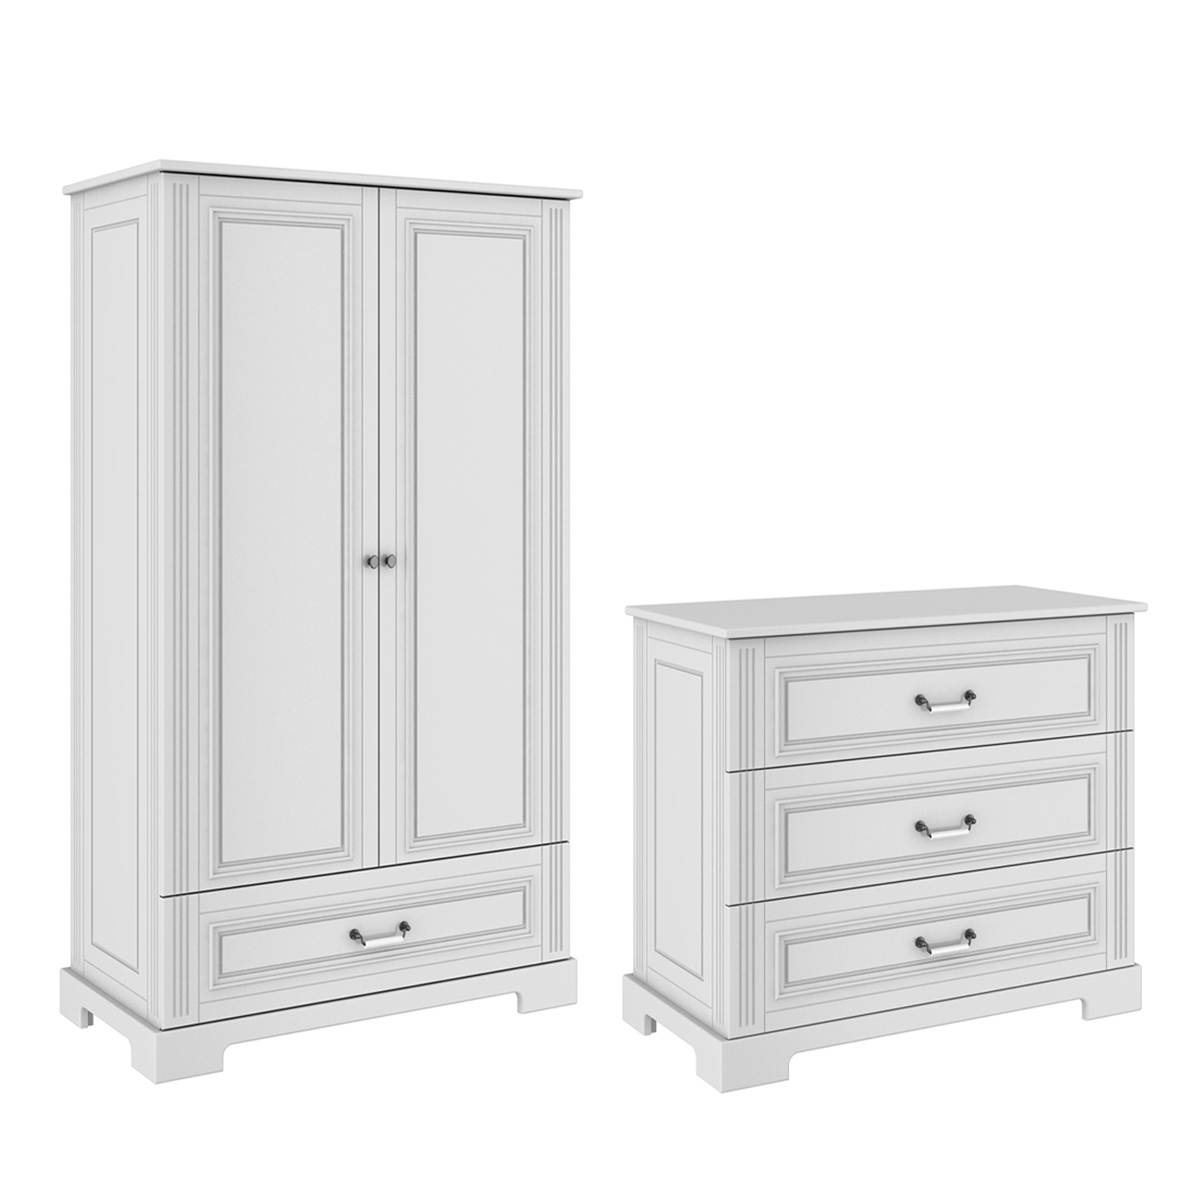 bellamy_ines_blanc_pack_commode_armoire